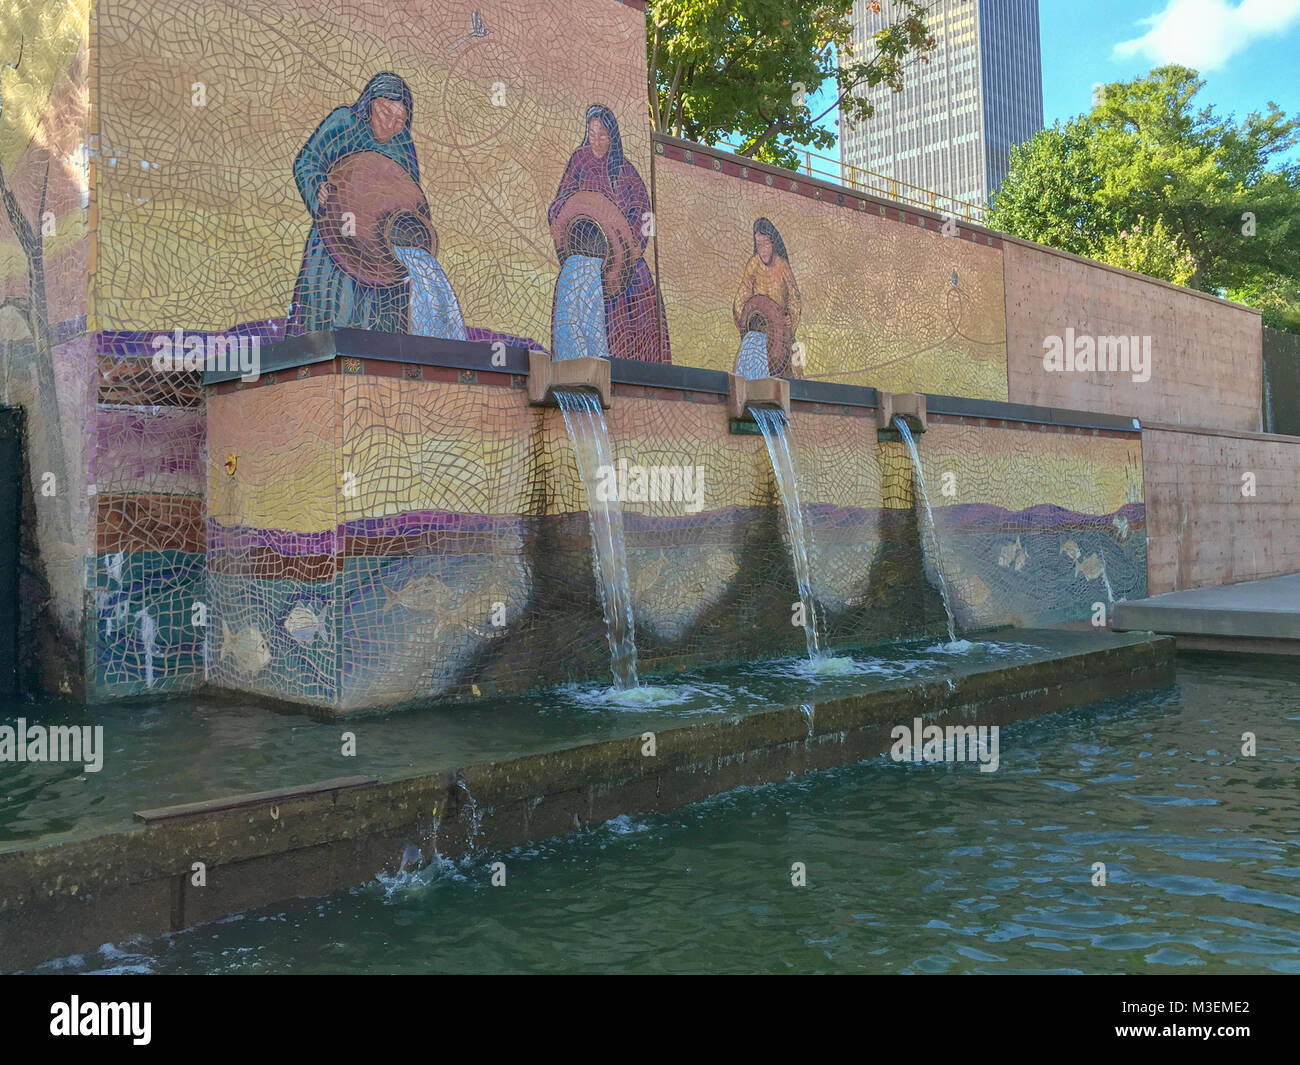 Oklahoma City, Oklahoma / September 27, 2015: This mosaic is depicting women pouring water out of large terracotta urns on the man made canal waterway Stock Photo